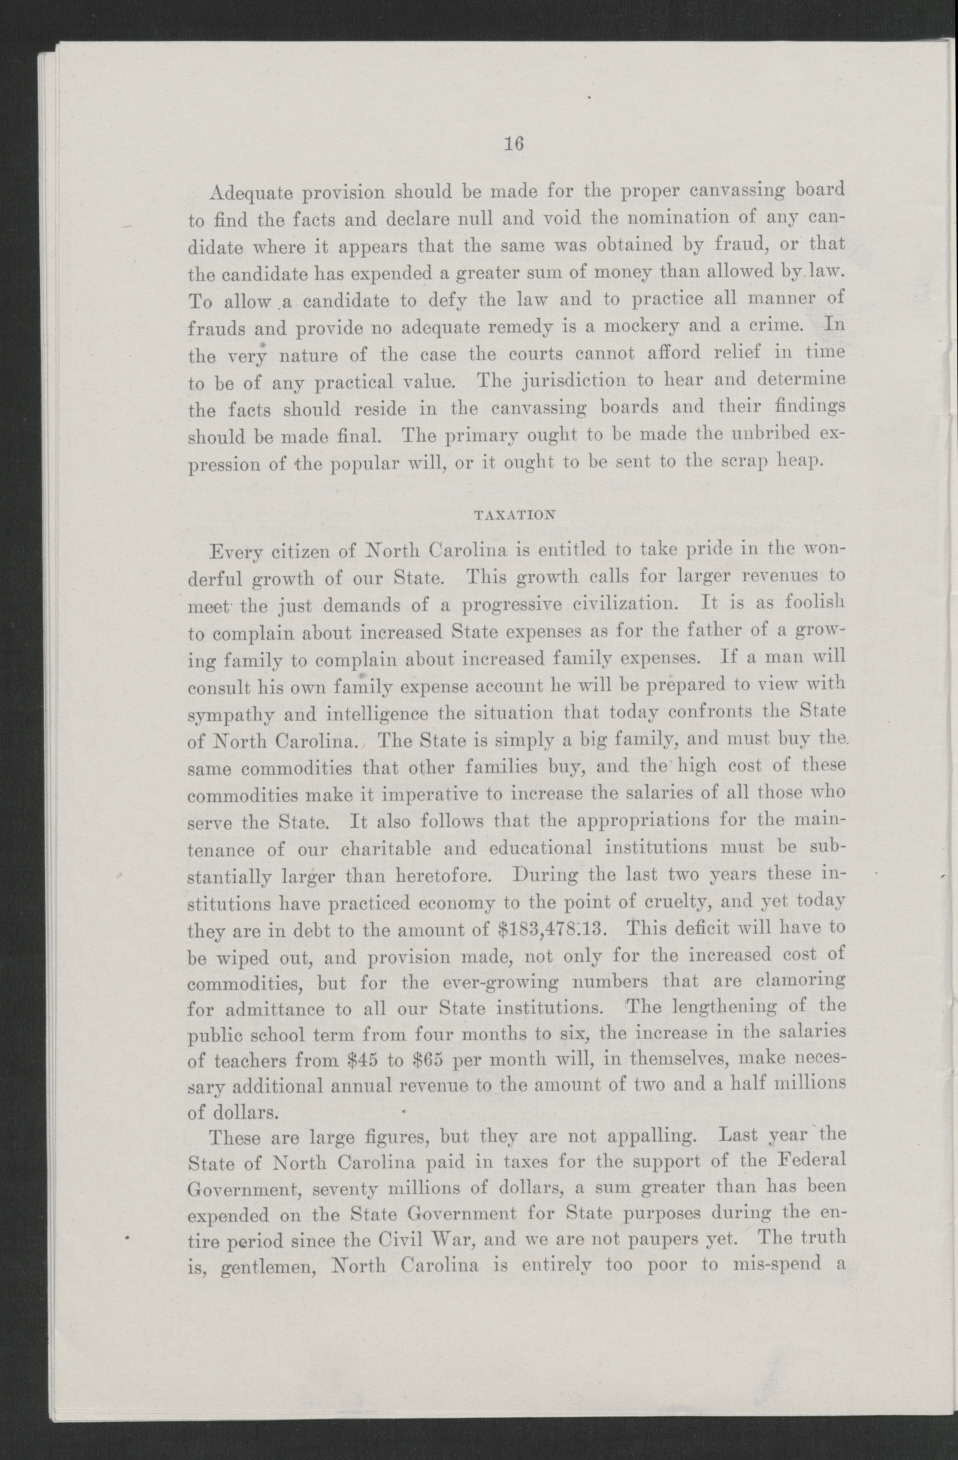 Biennial Message of Governor Thomas W. Bickett to the General Assembly, January 9, 1919, page 14